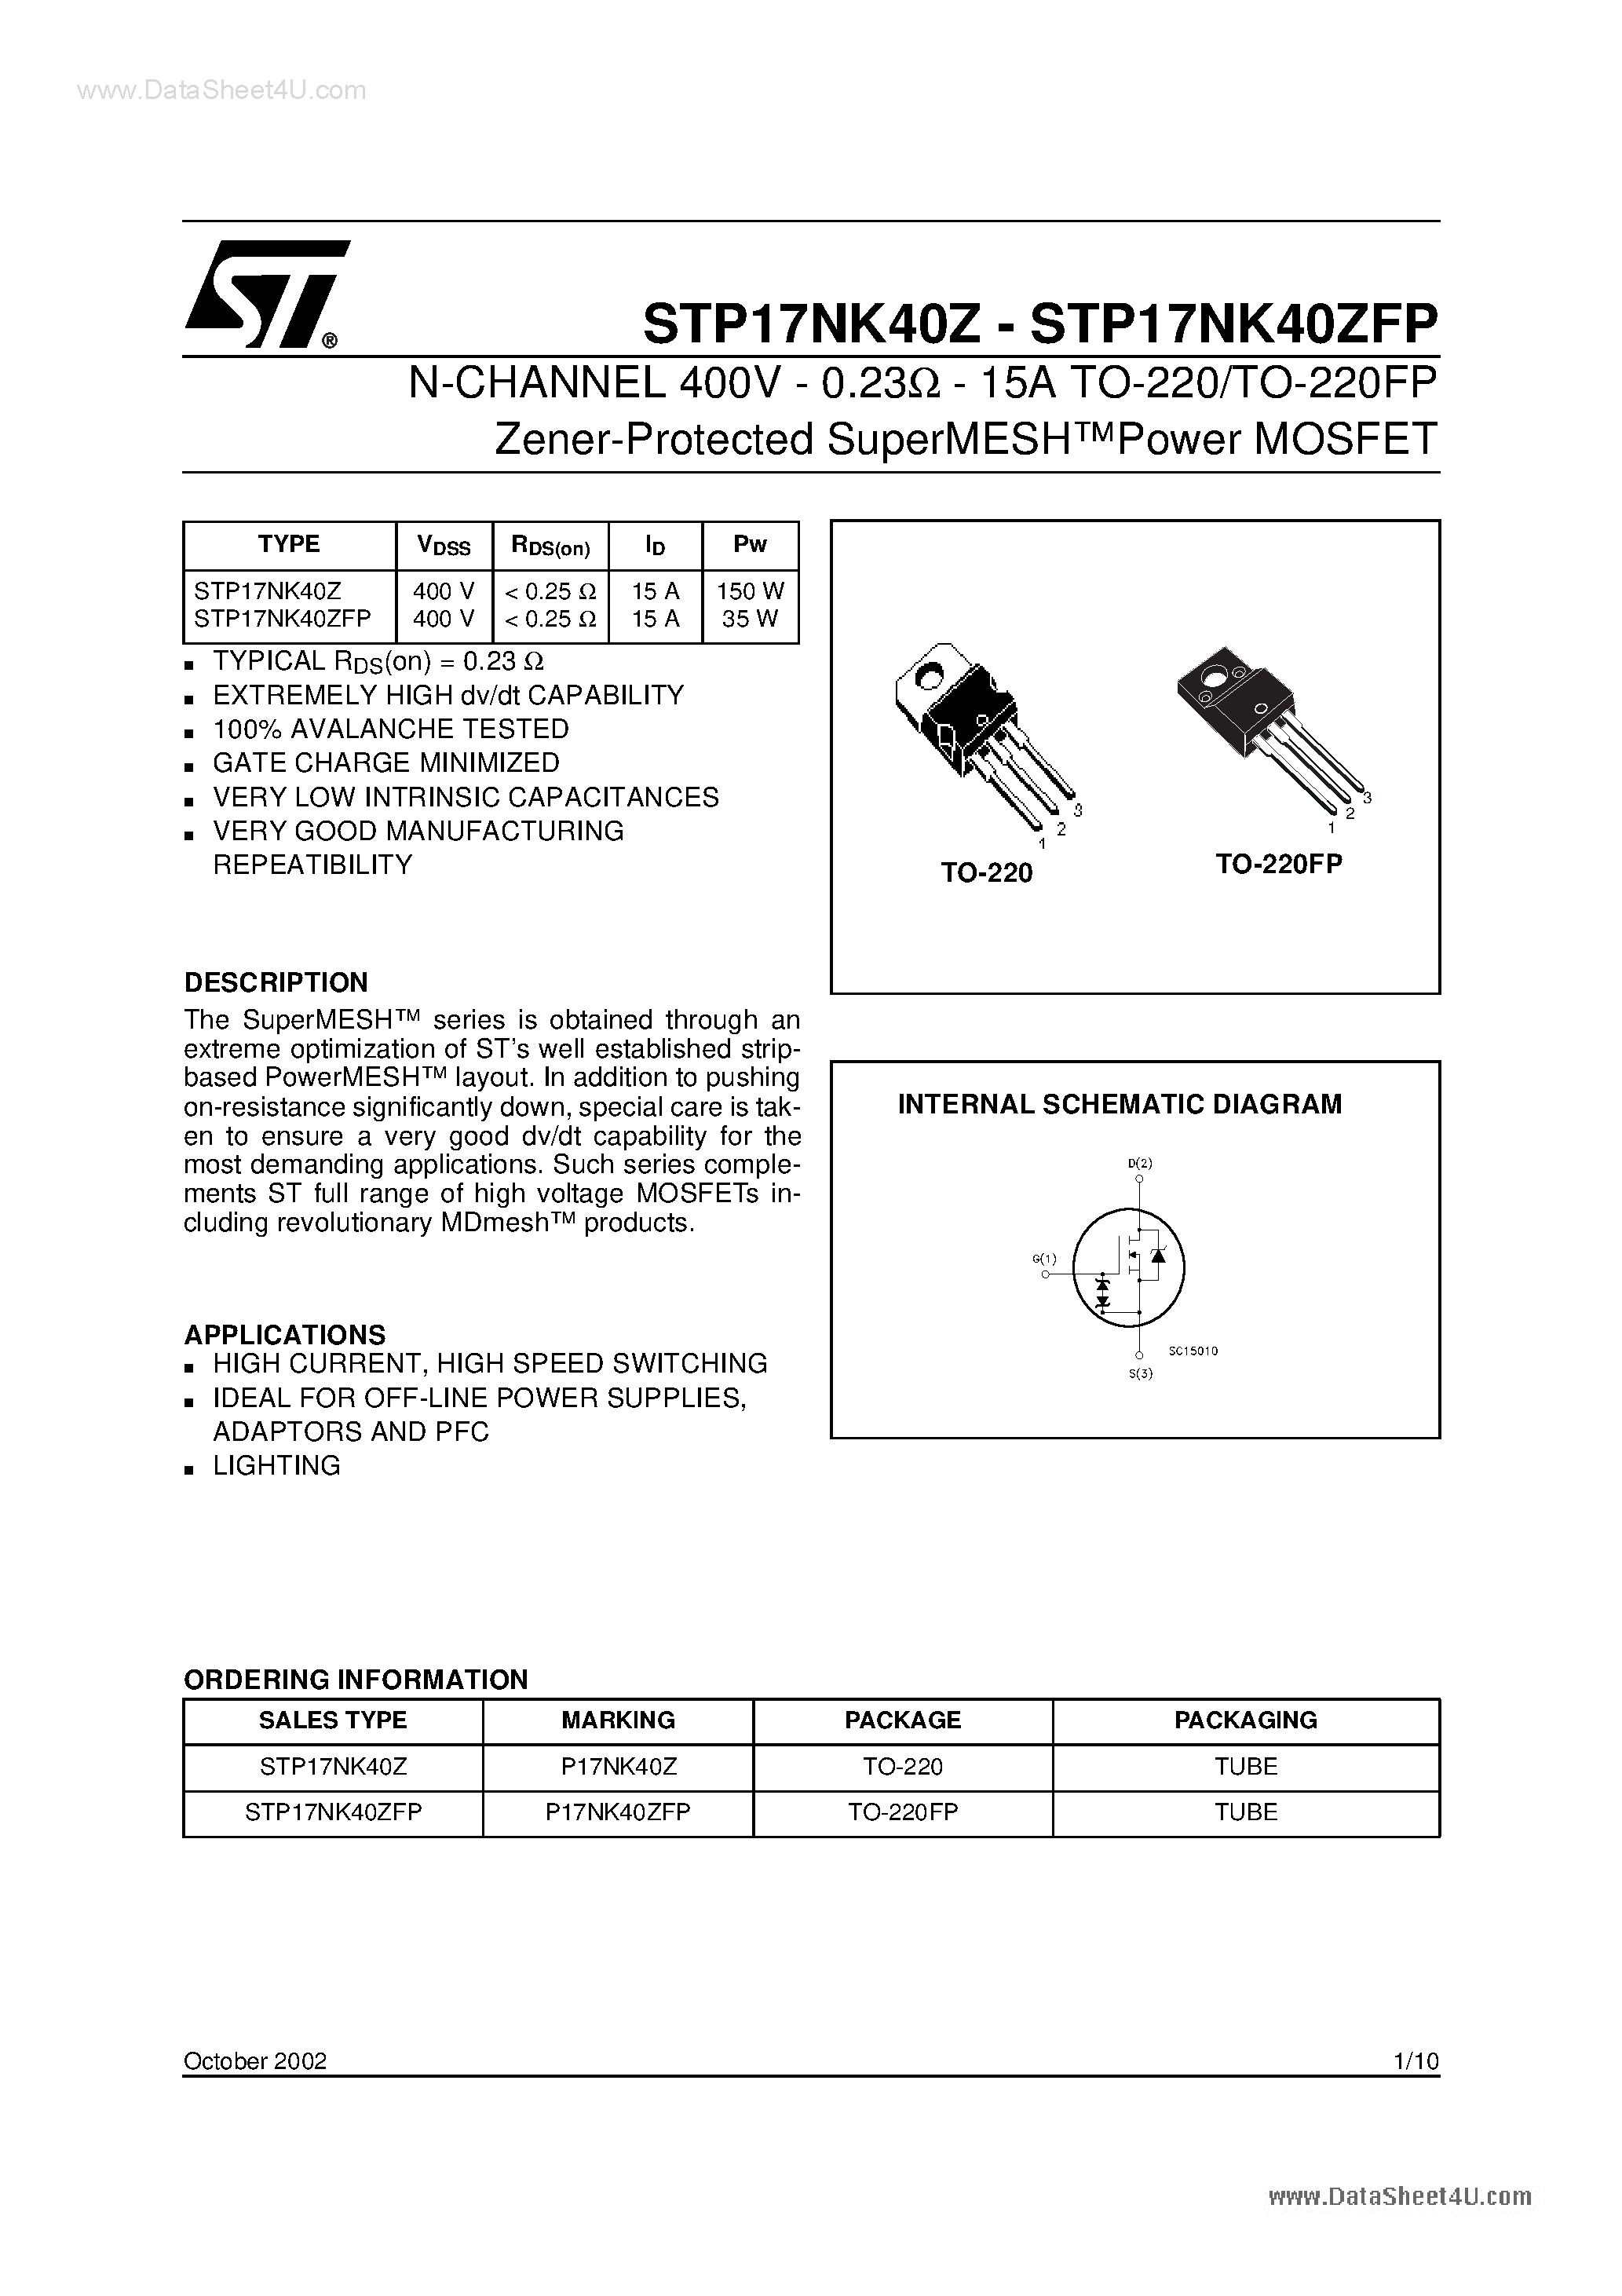 Даташит STP17NK40Z - N-CHANNEL Power MOSFET страница 1